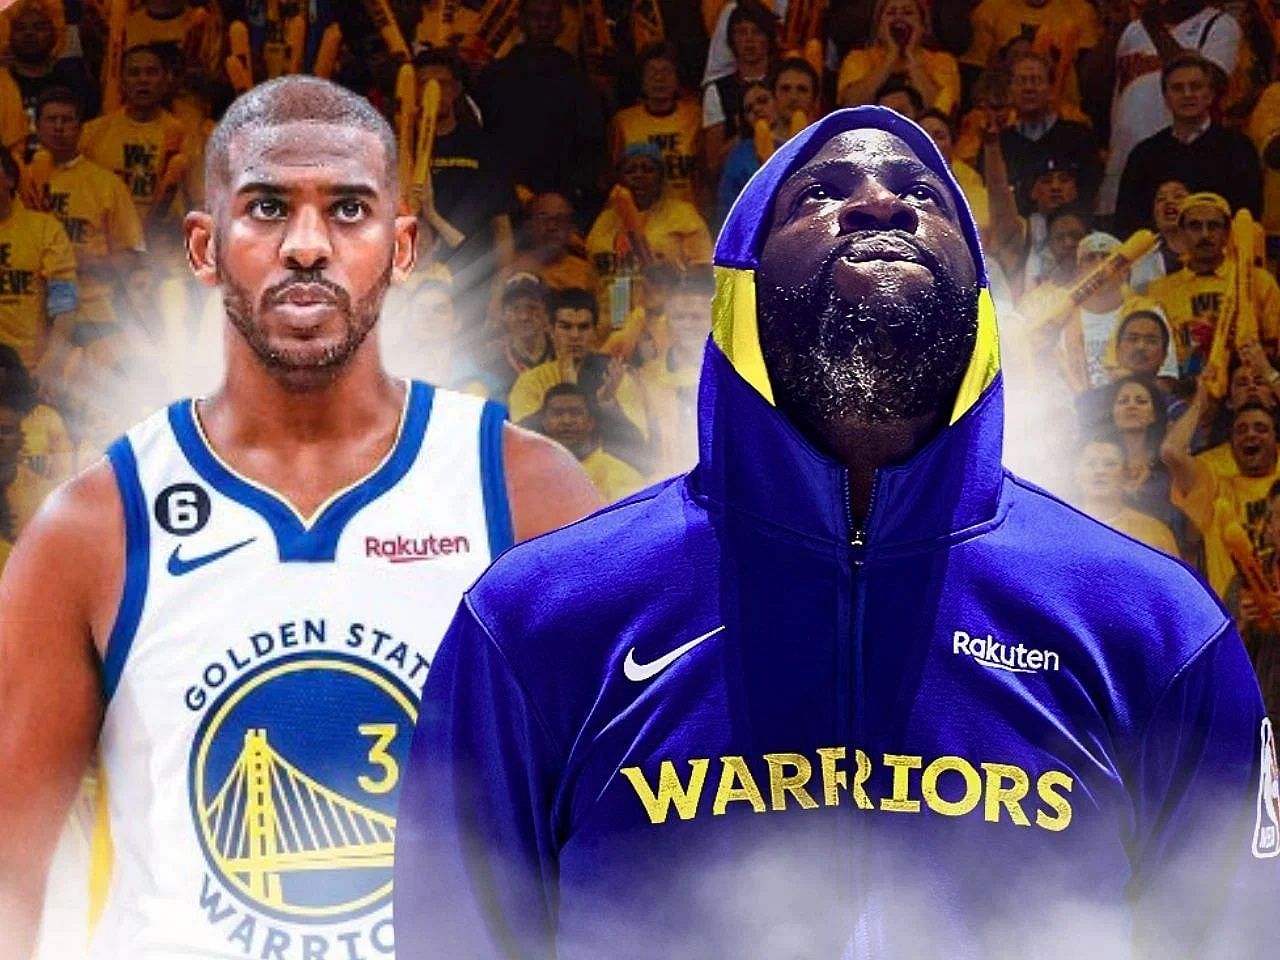 Chris Paul (L) and Draymond Green (R) are now teammates with the Golden State Warriors.